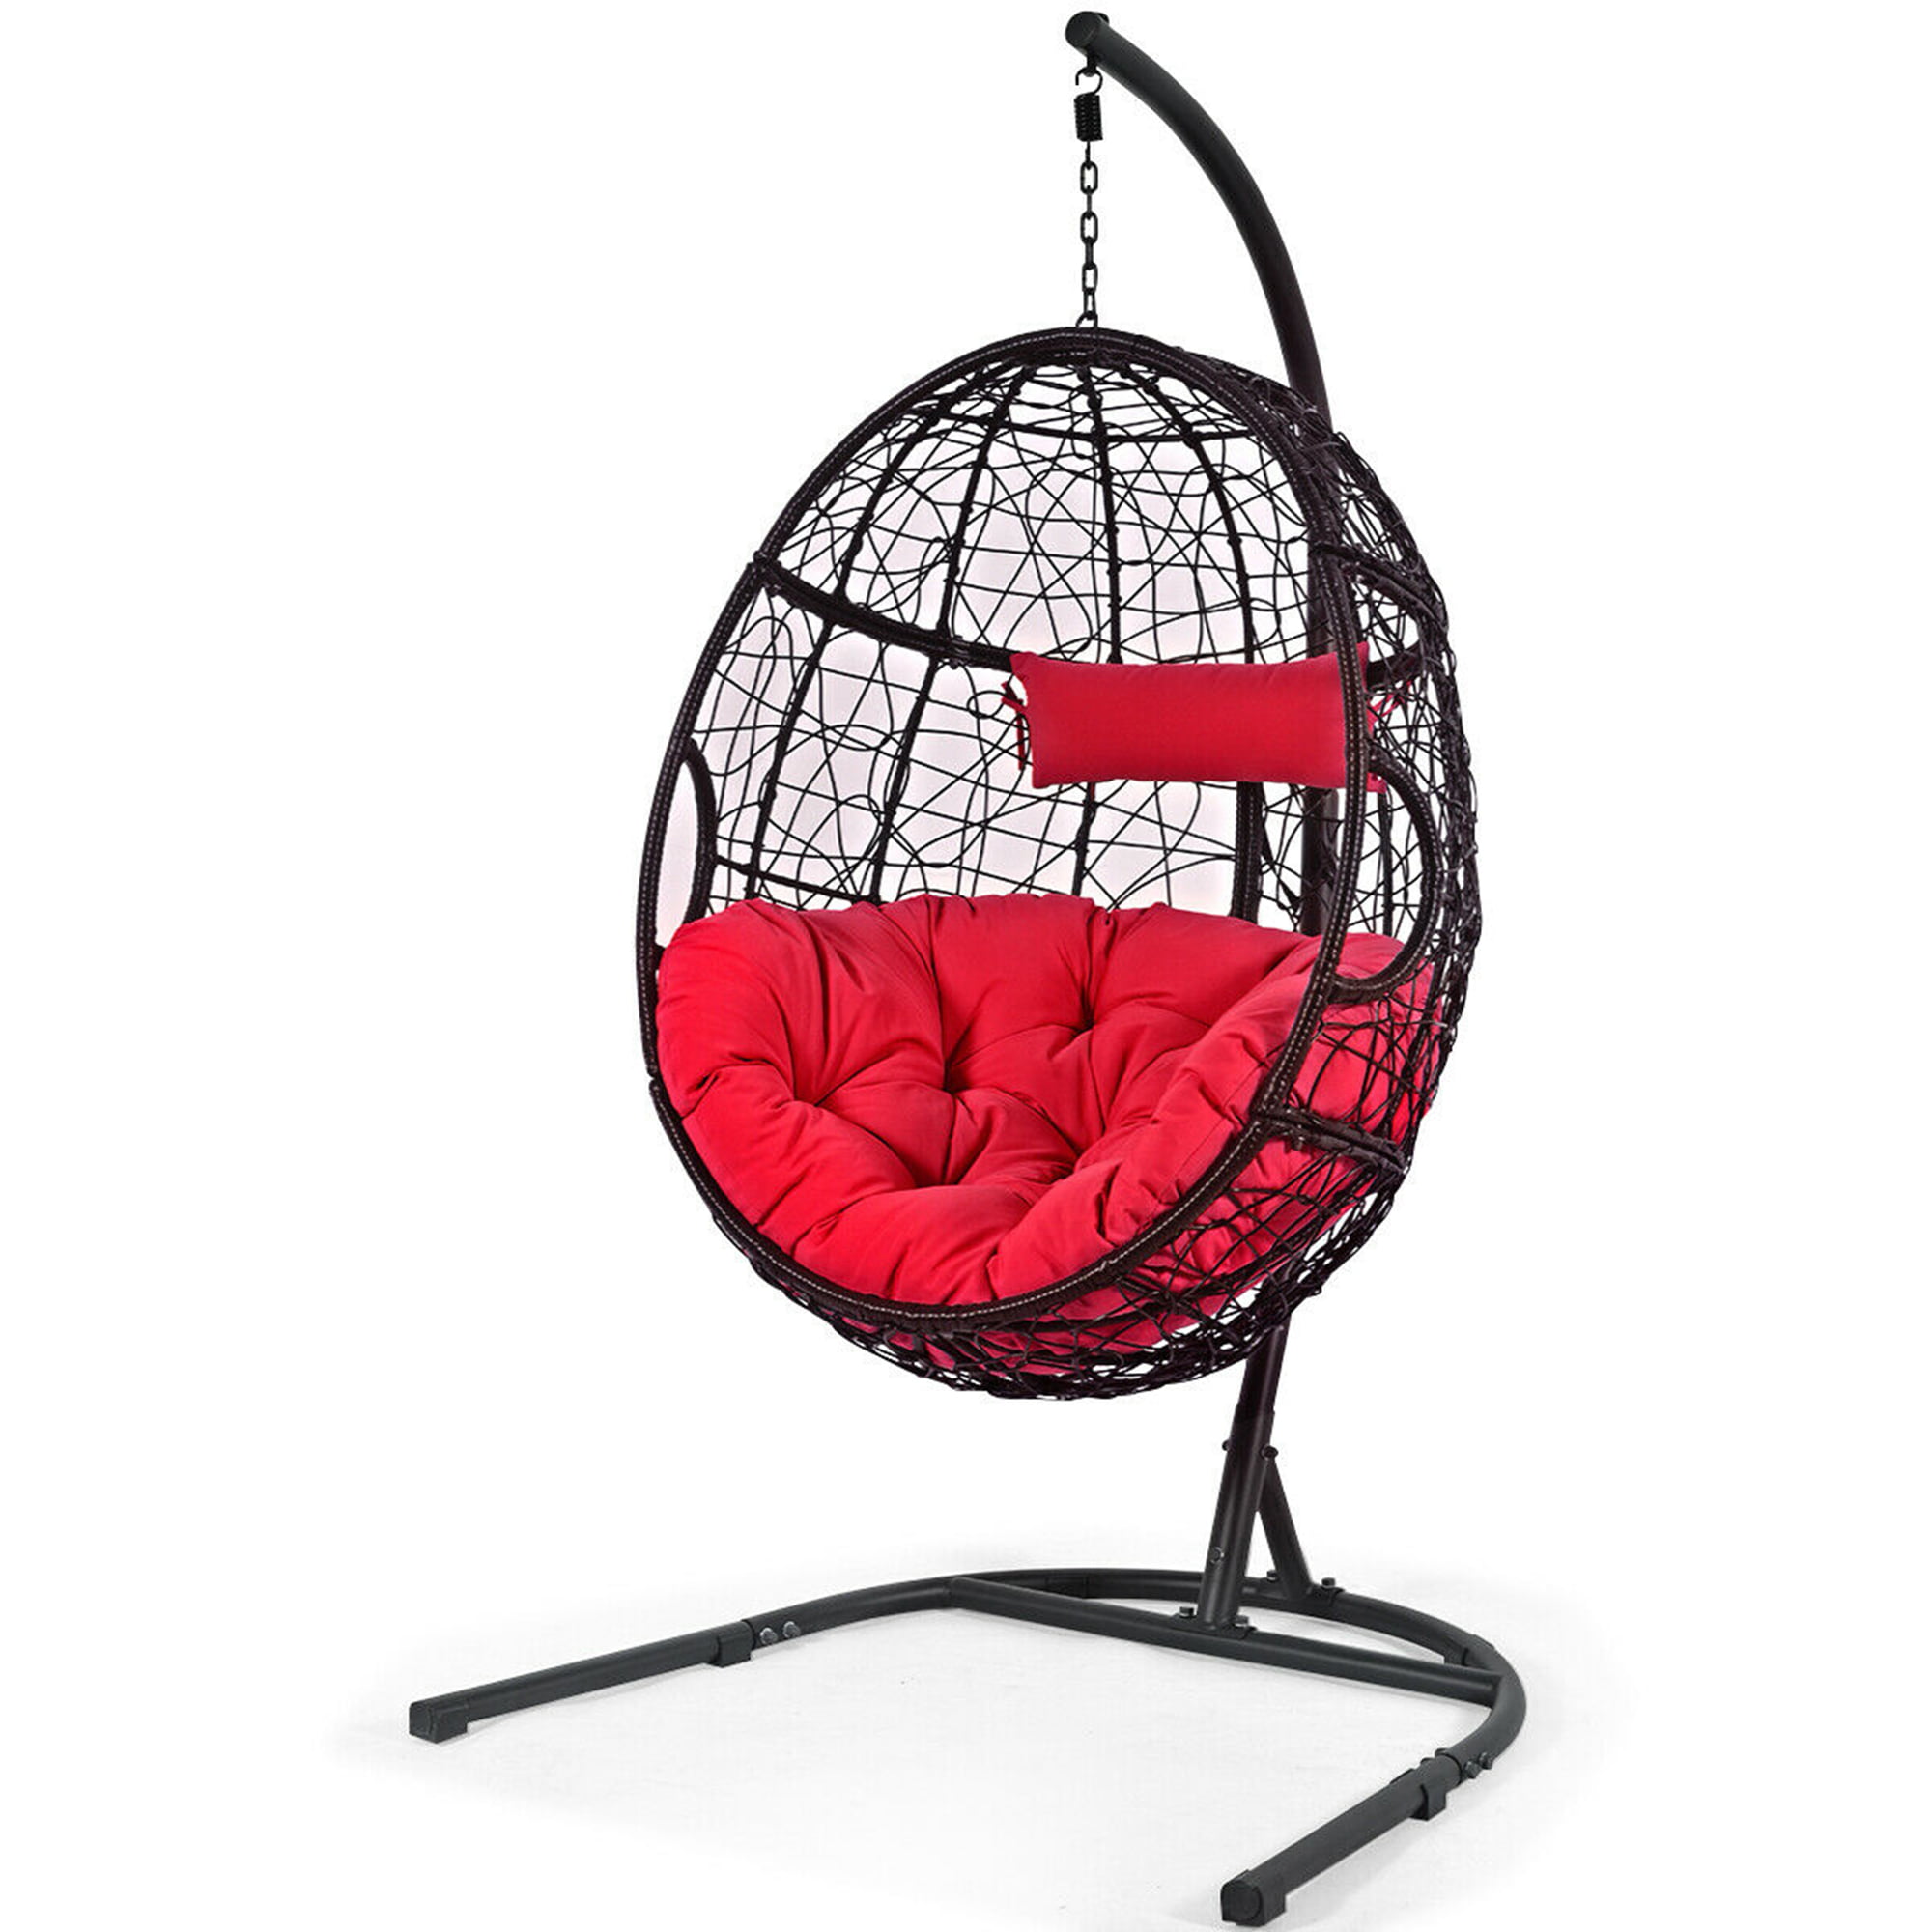 Gymax Hanging Hammock Chair Egg Swing Chair W Red Cushion Pillow Stand Walmart Canada